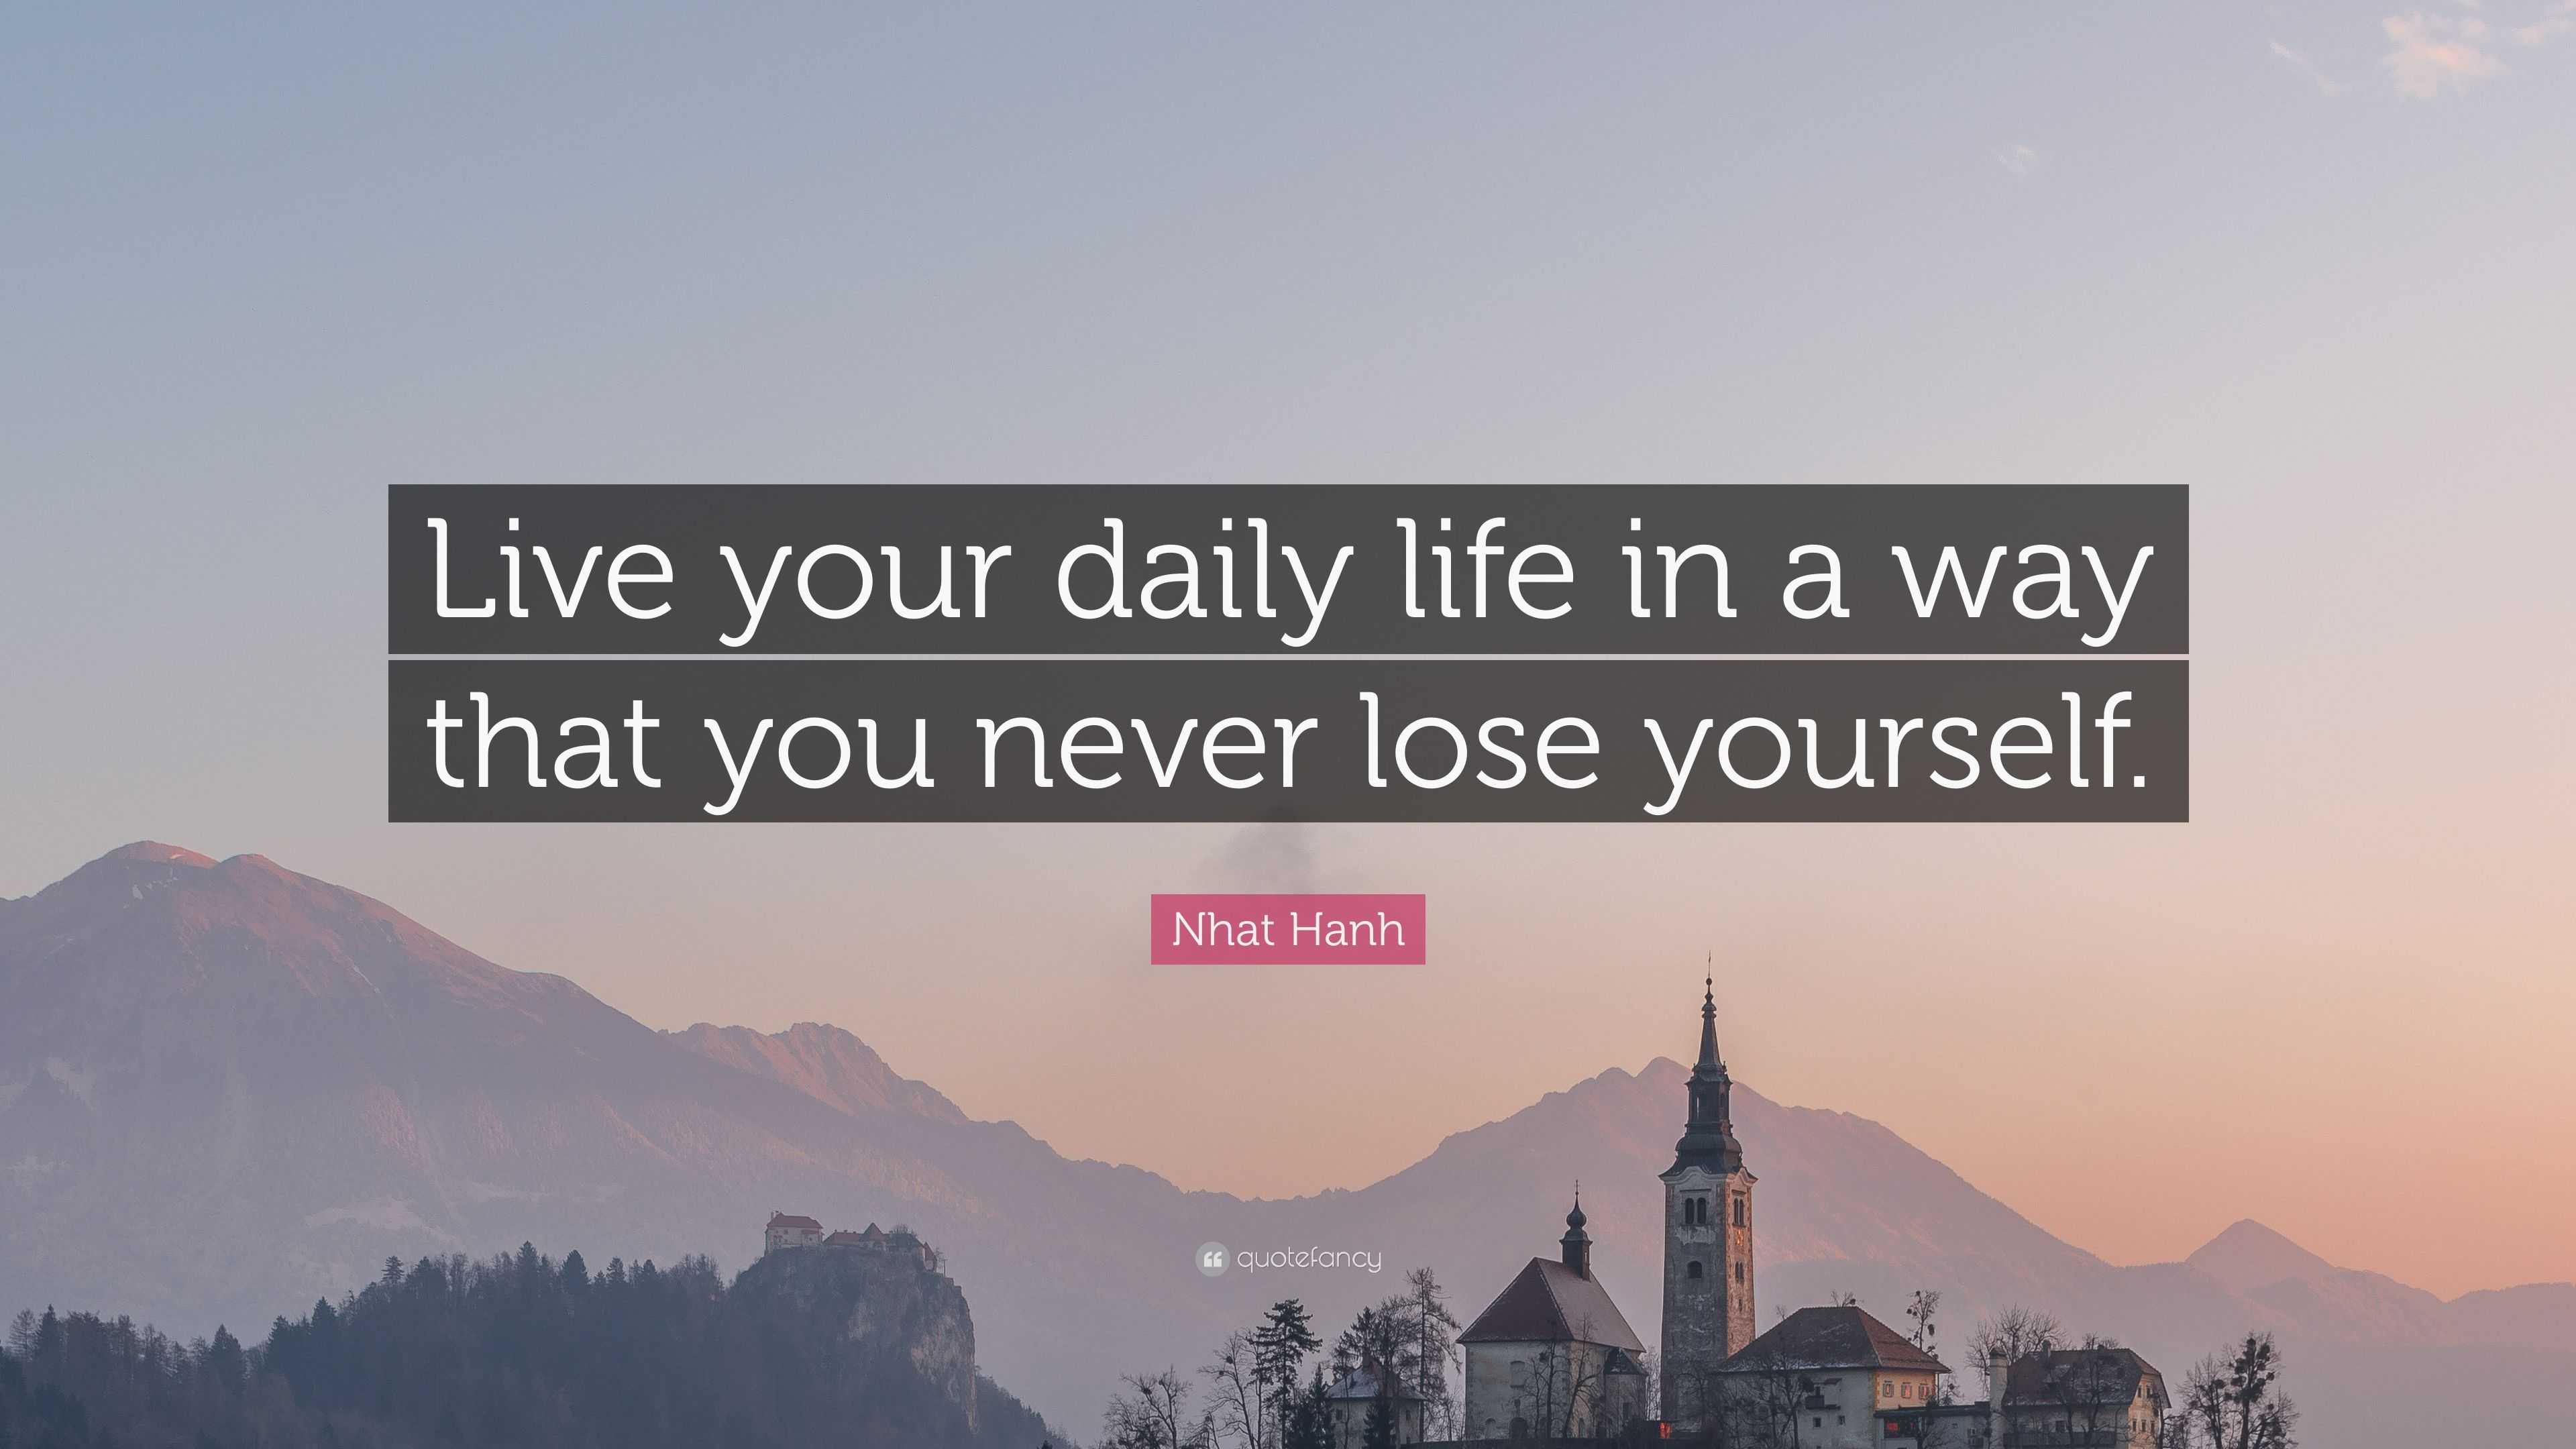 Nhat Hanh Quote: “Live your daily life in a way that you never lose ...